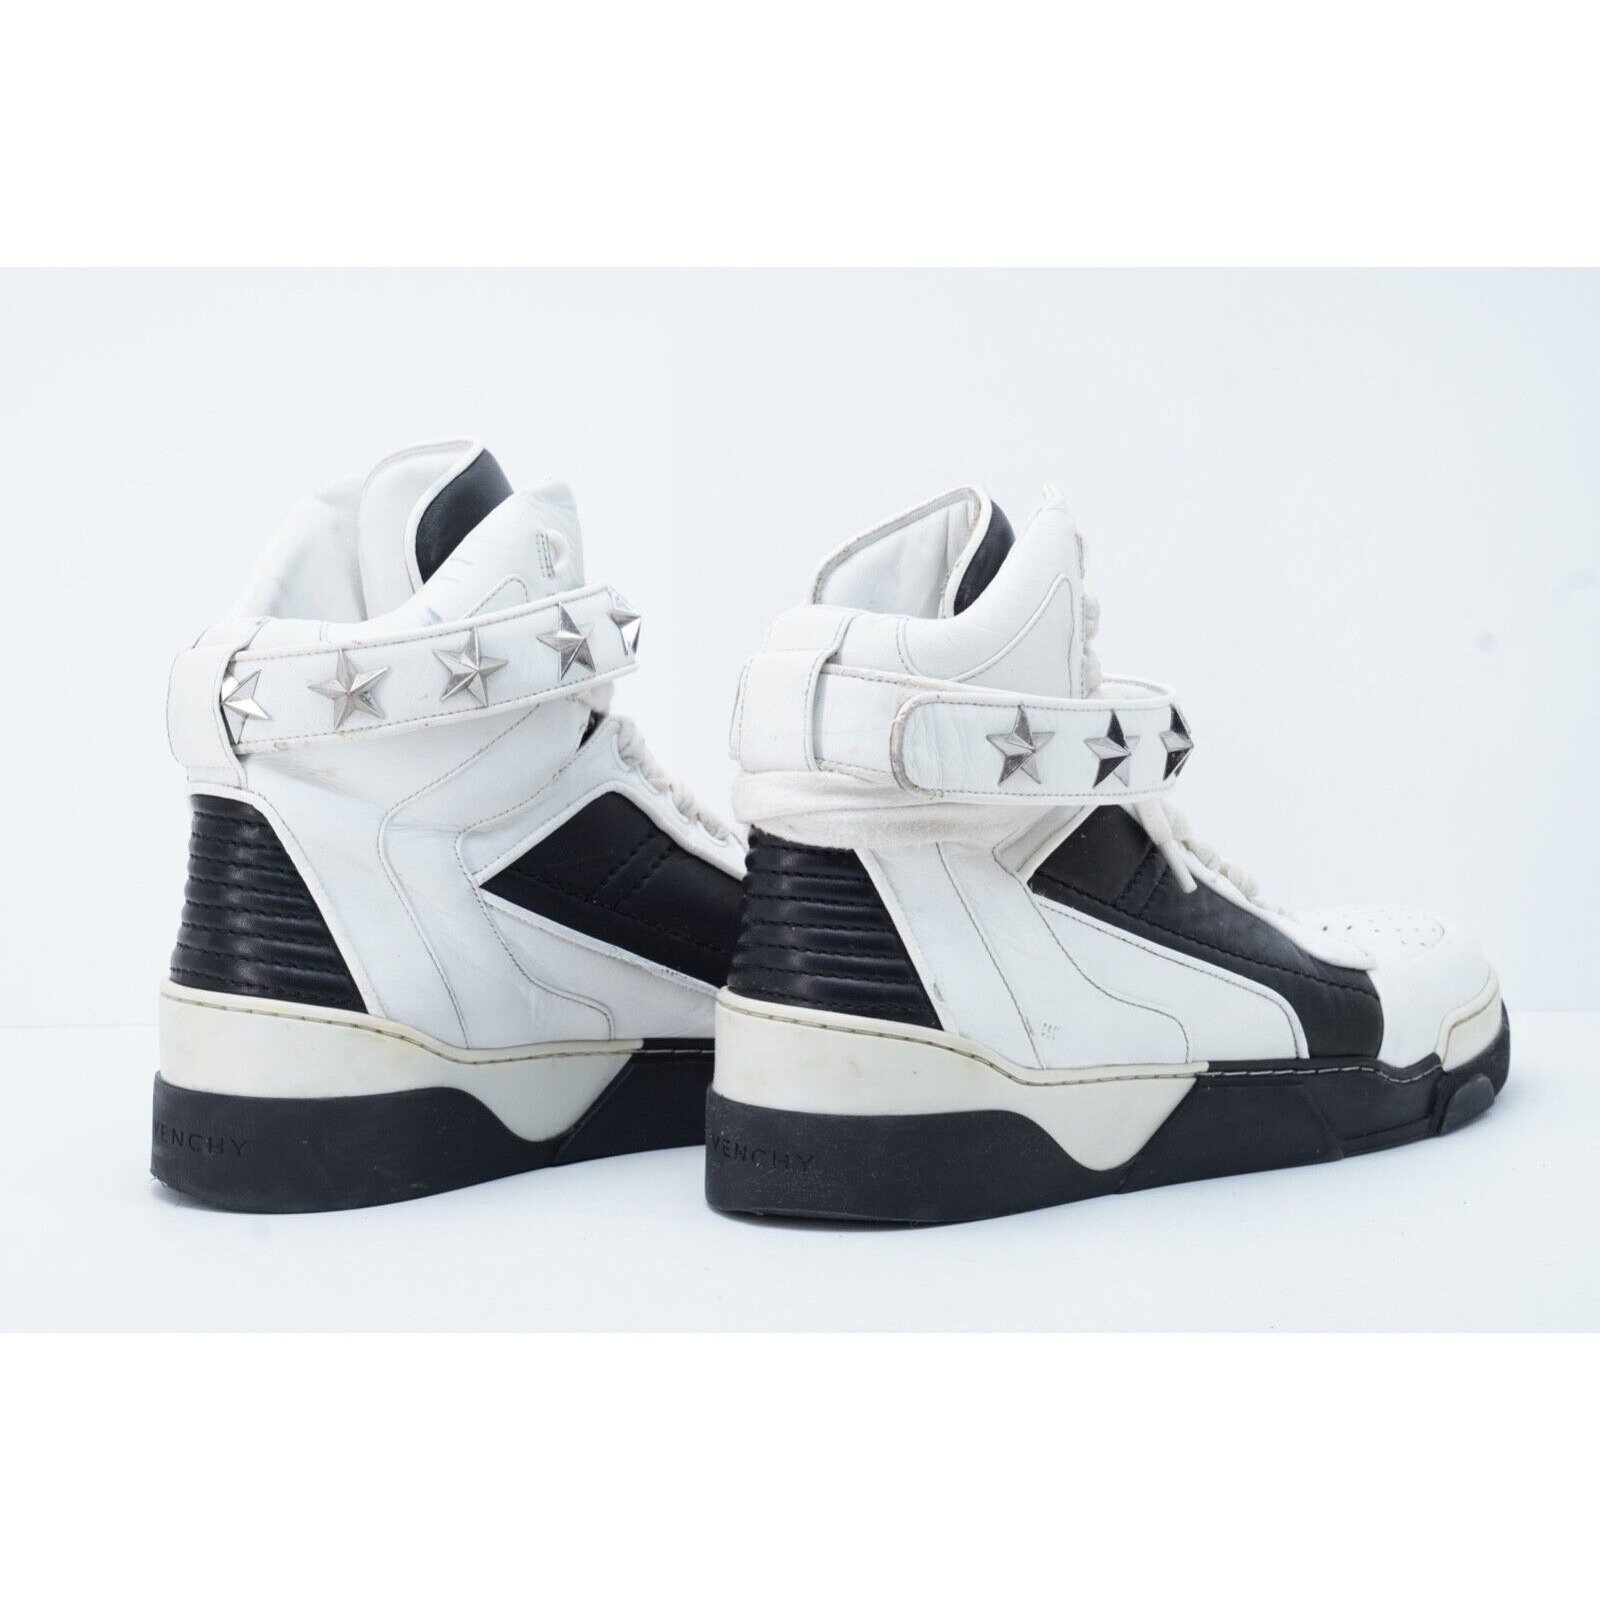 Givenchy Tyson Star Sneakers Shoes White Leather High Top 44 - 10